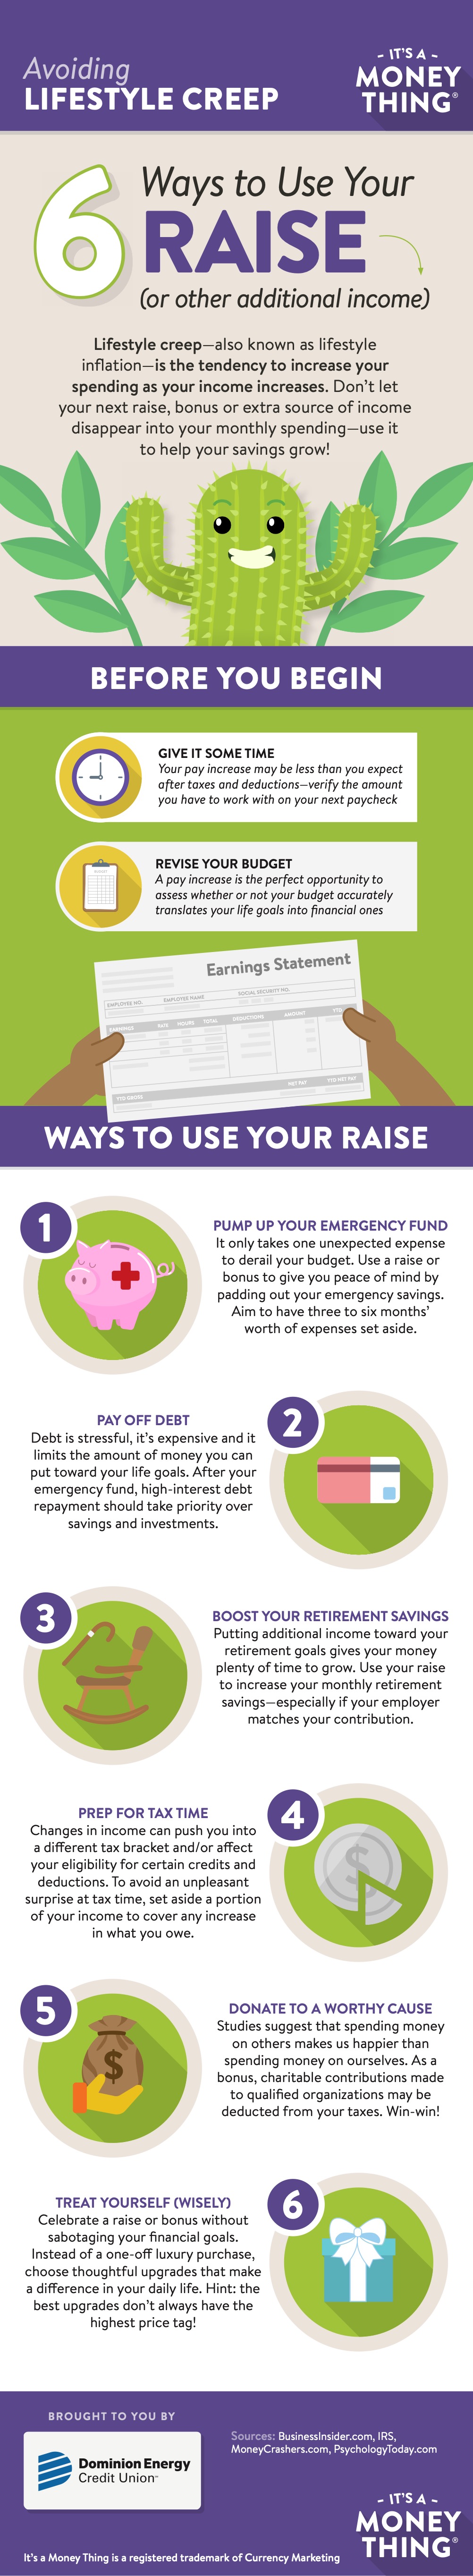 6 Ways to Use your Raise